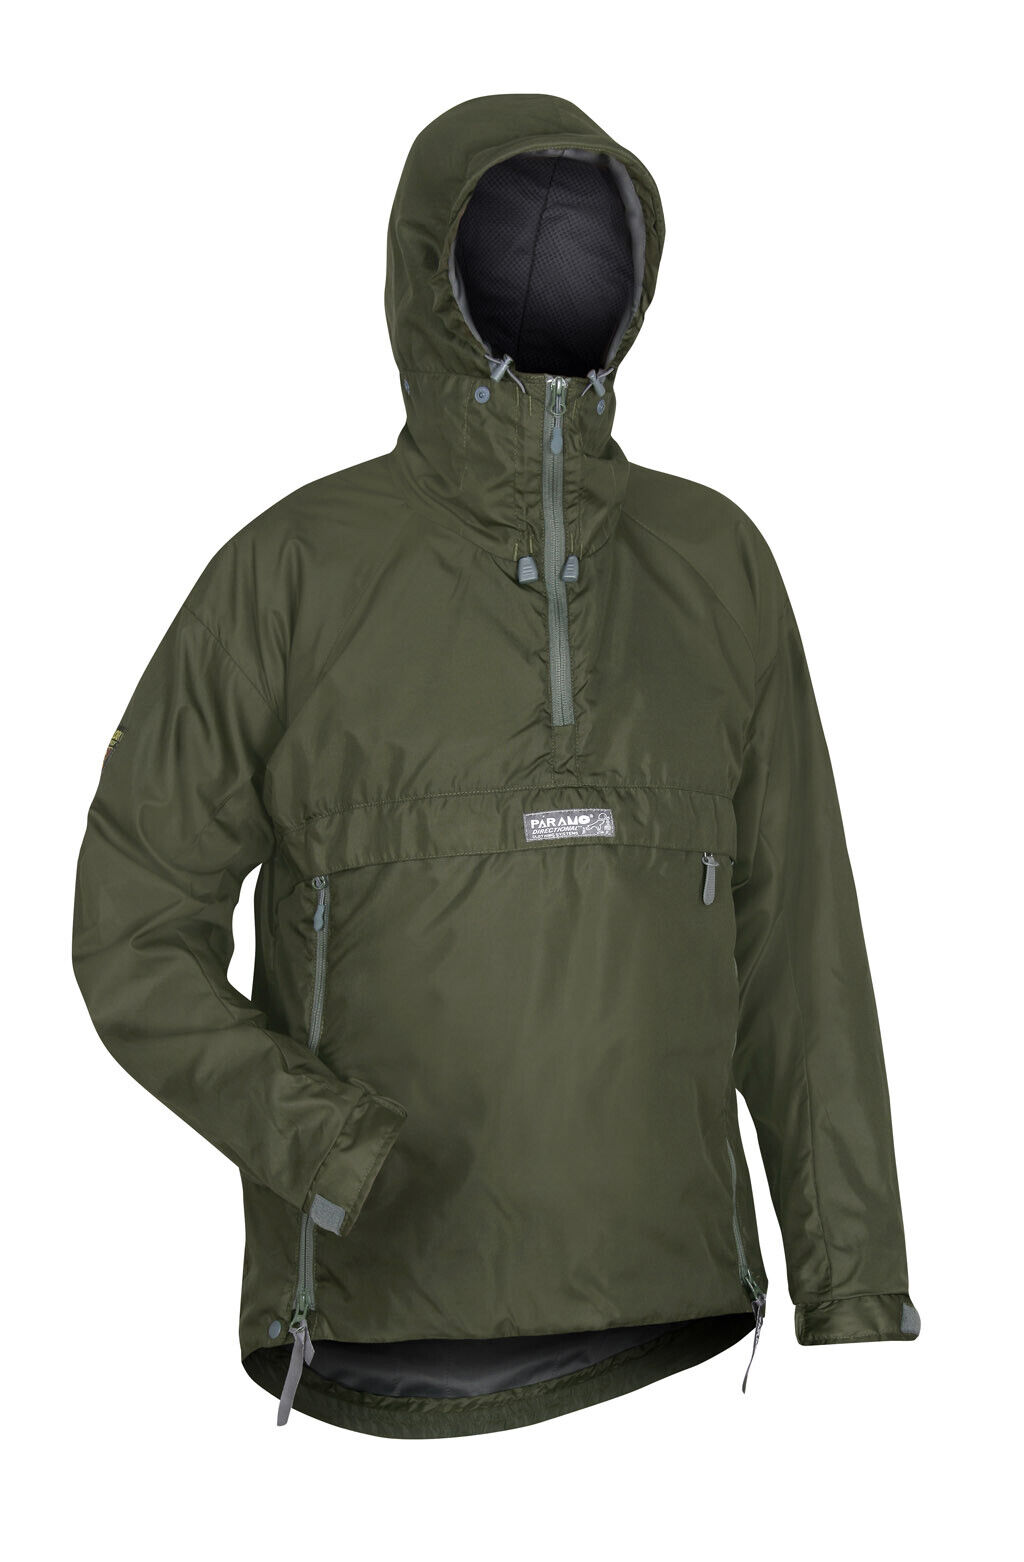 Buy a Paramo Men's Velez Adventure Smock (Old Style) from The ...